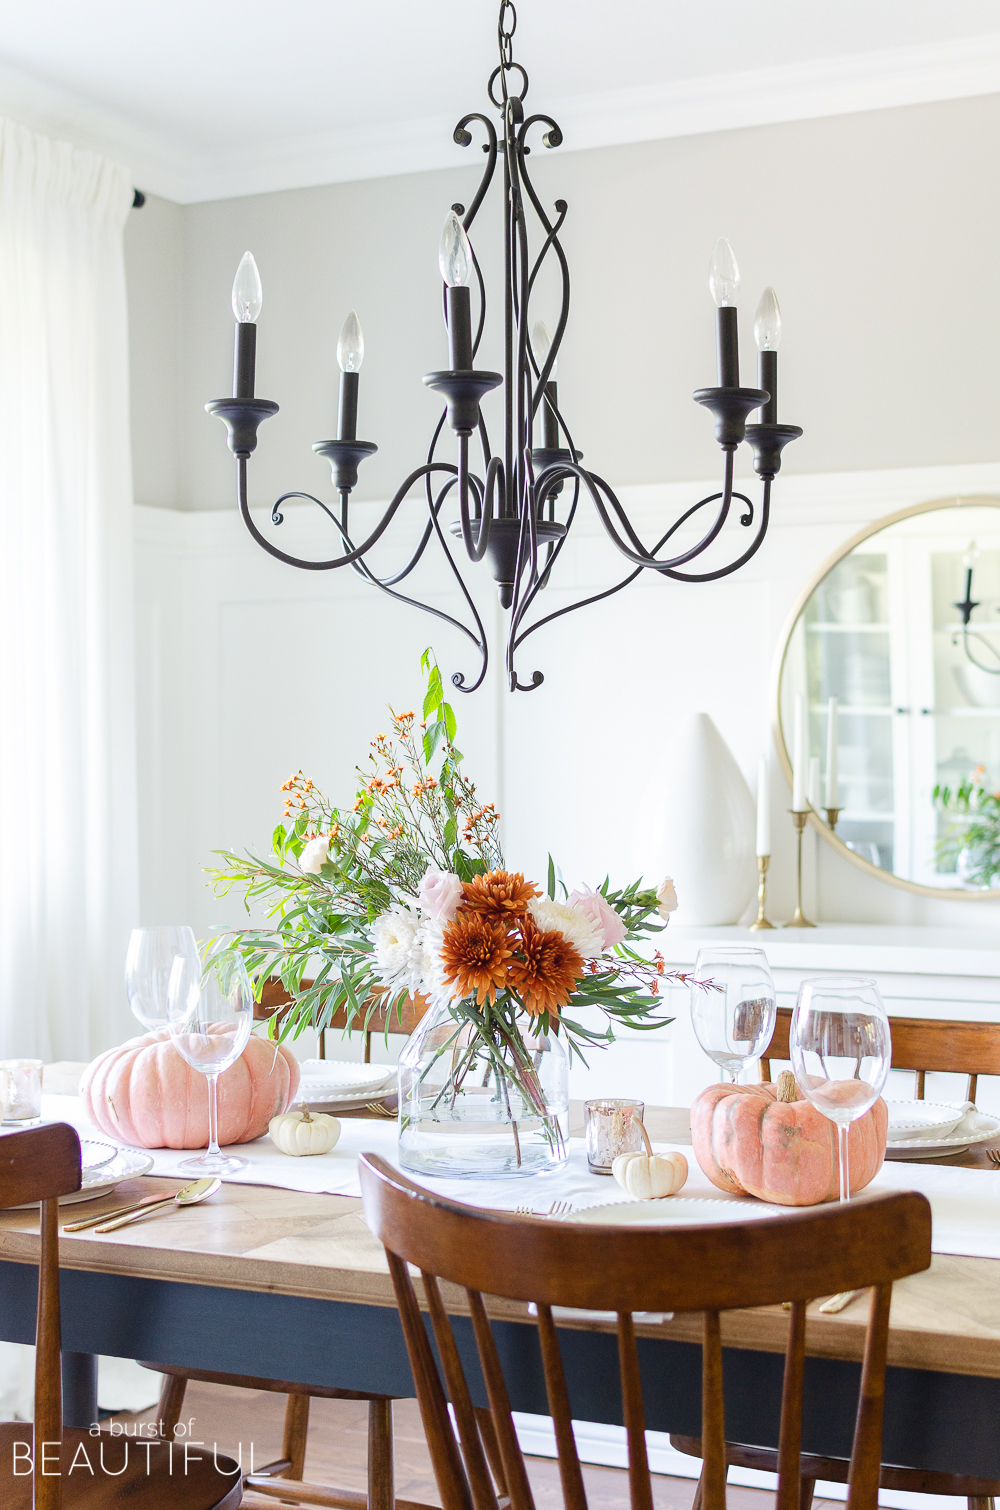 Find inspiration for entertaining this fall season with 16 festive fall tablescapes, including a simple fall table setting in traditional autumn colors. 